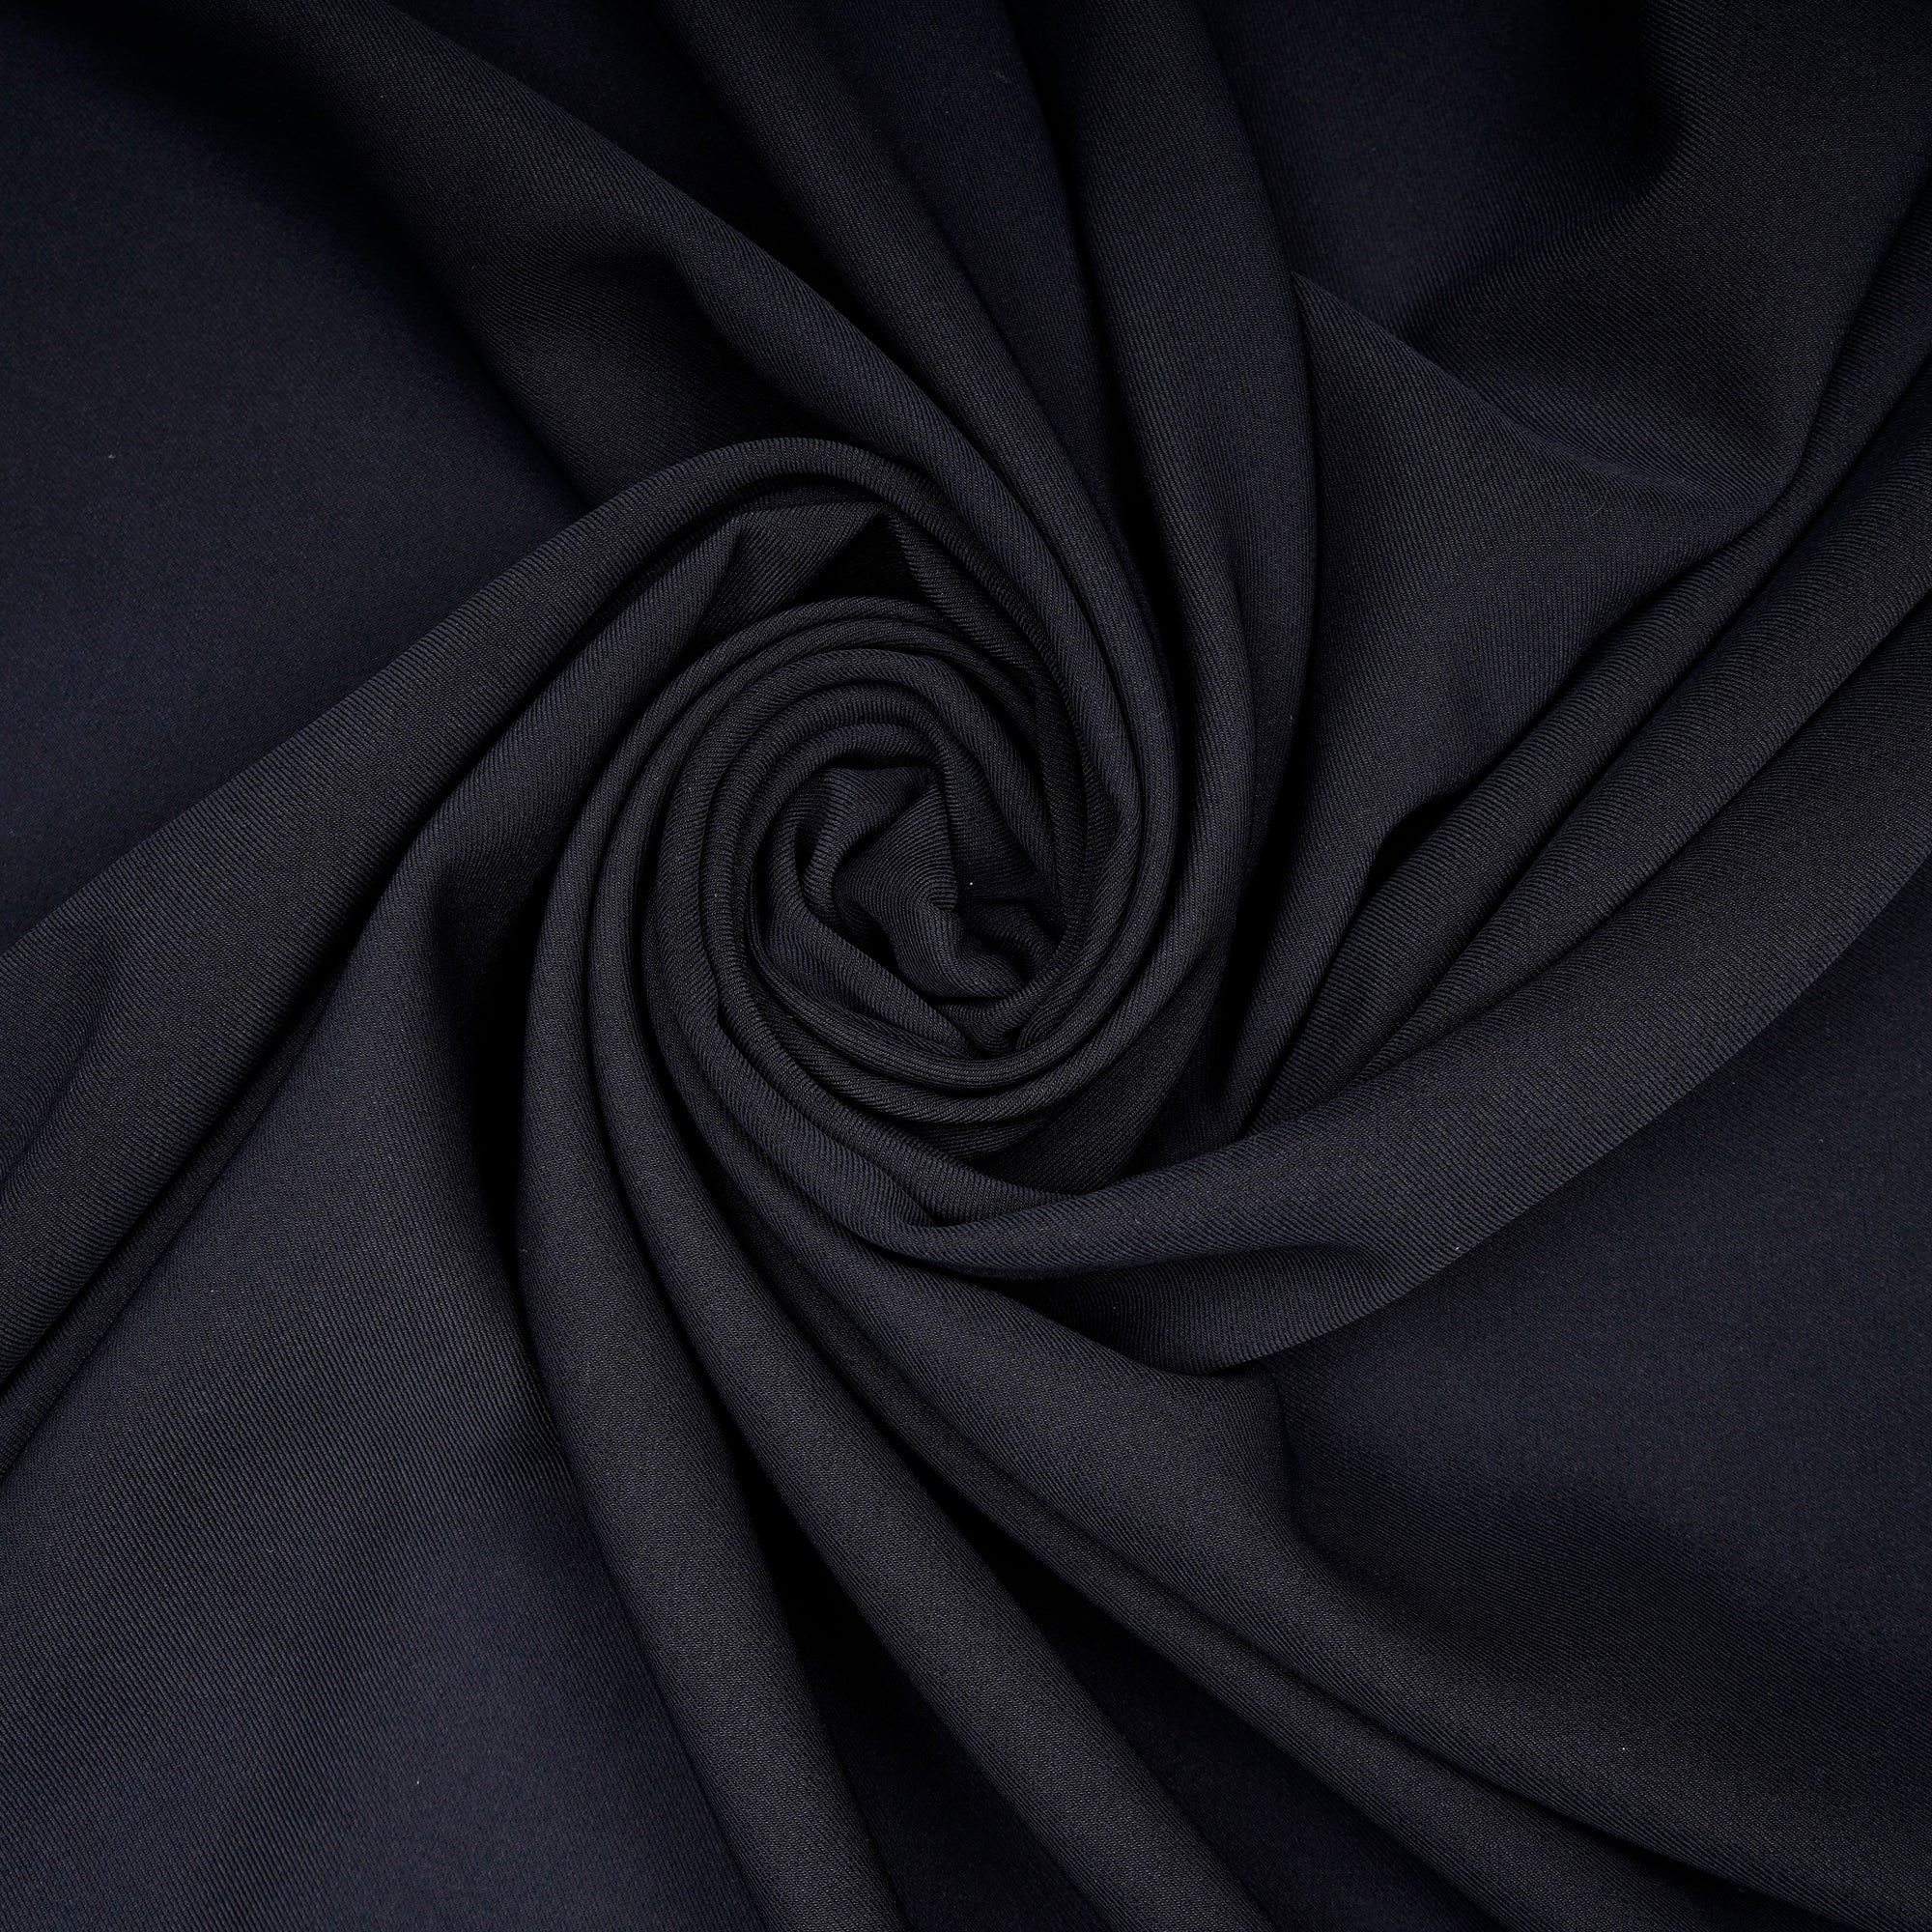 Black Solid Dyed Imported British Twill Fabric (60" Width)